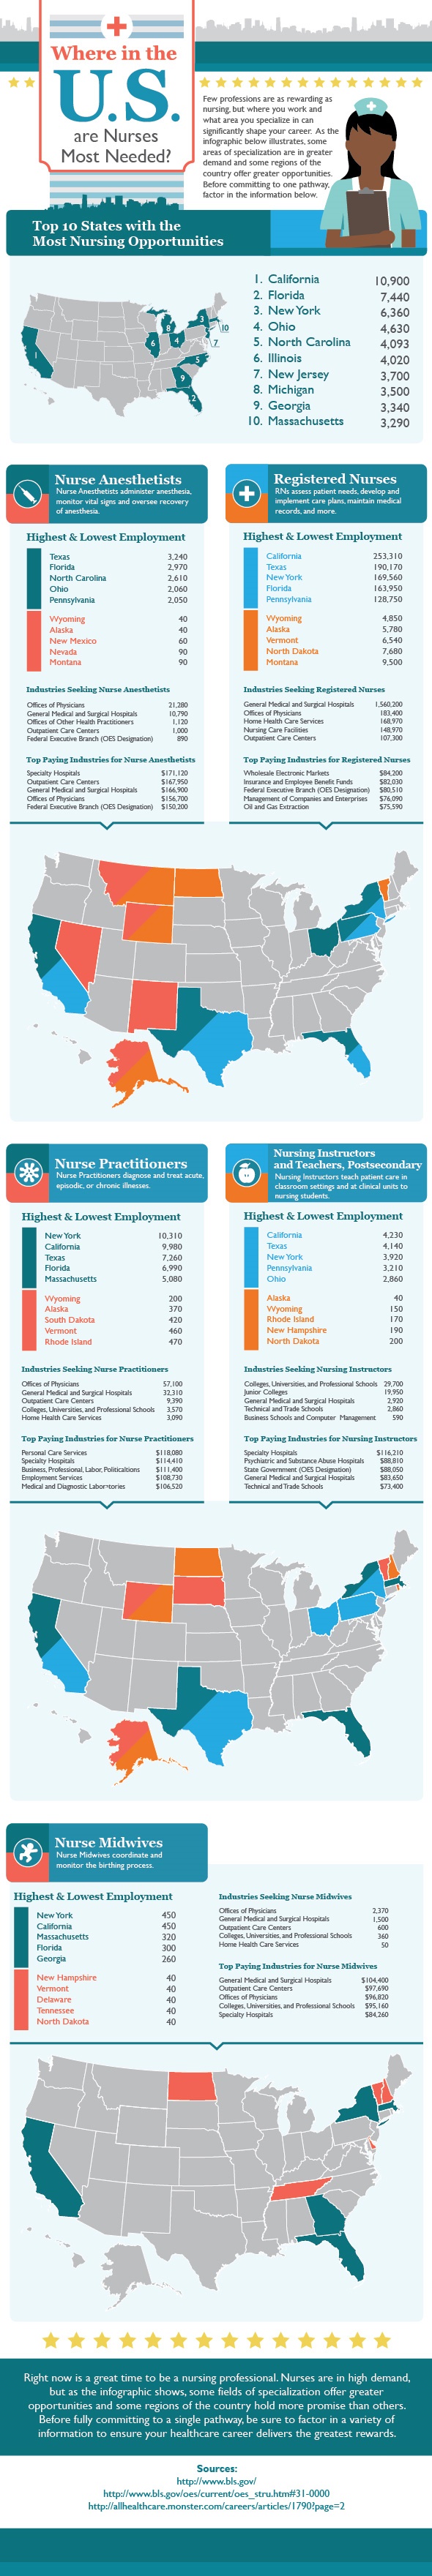 Where In The US Are Nurses Need The Most?